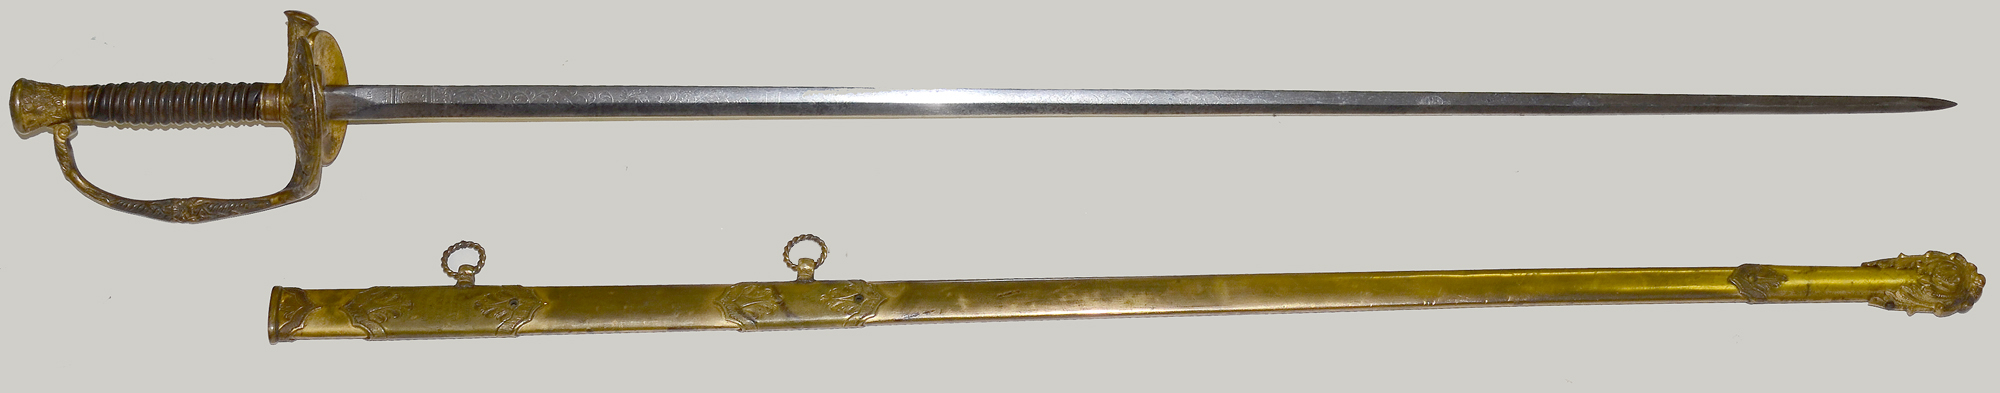 MODEL 1860 STAFF OFFICER’S SWORD PRESENTED TO CAPT. WILLIAM R. IRWIN, 8TH INDIANA INFANTRY AND US COMMISSARY DEPARTMENT